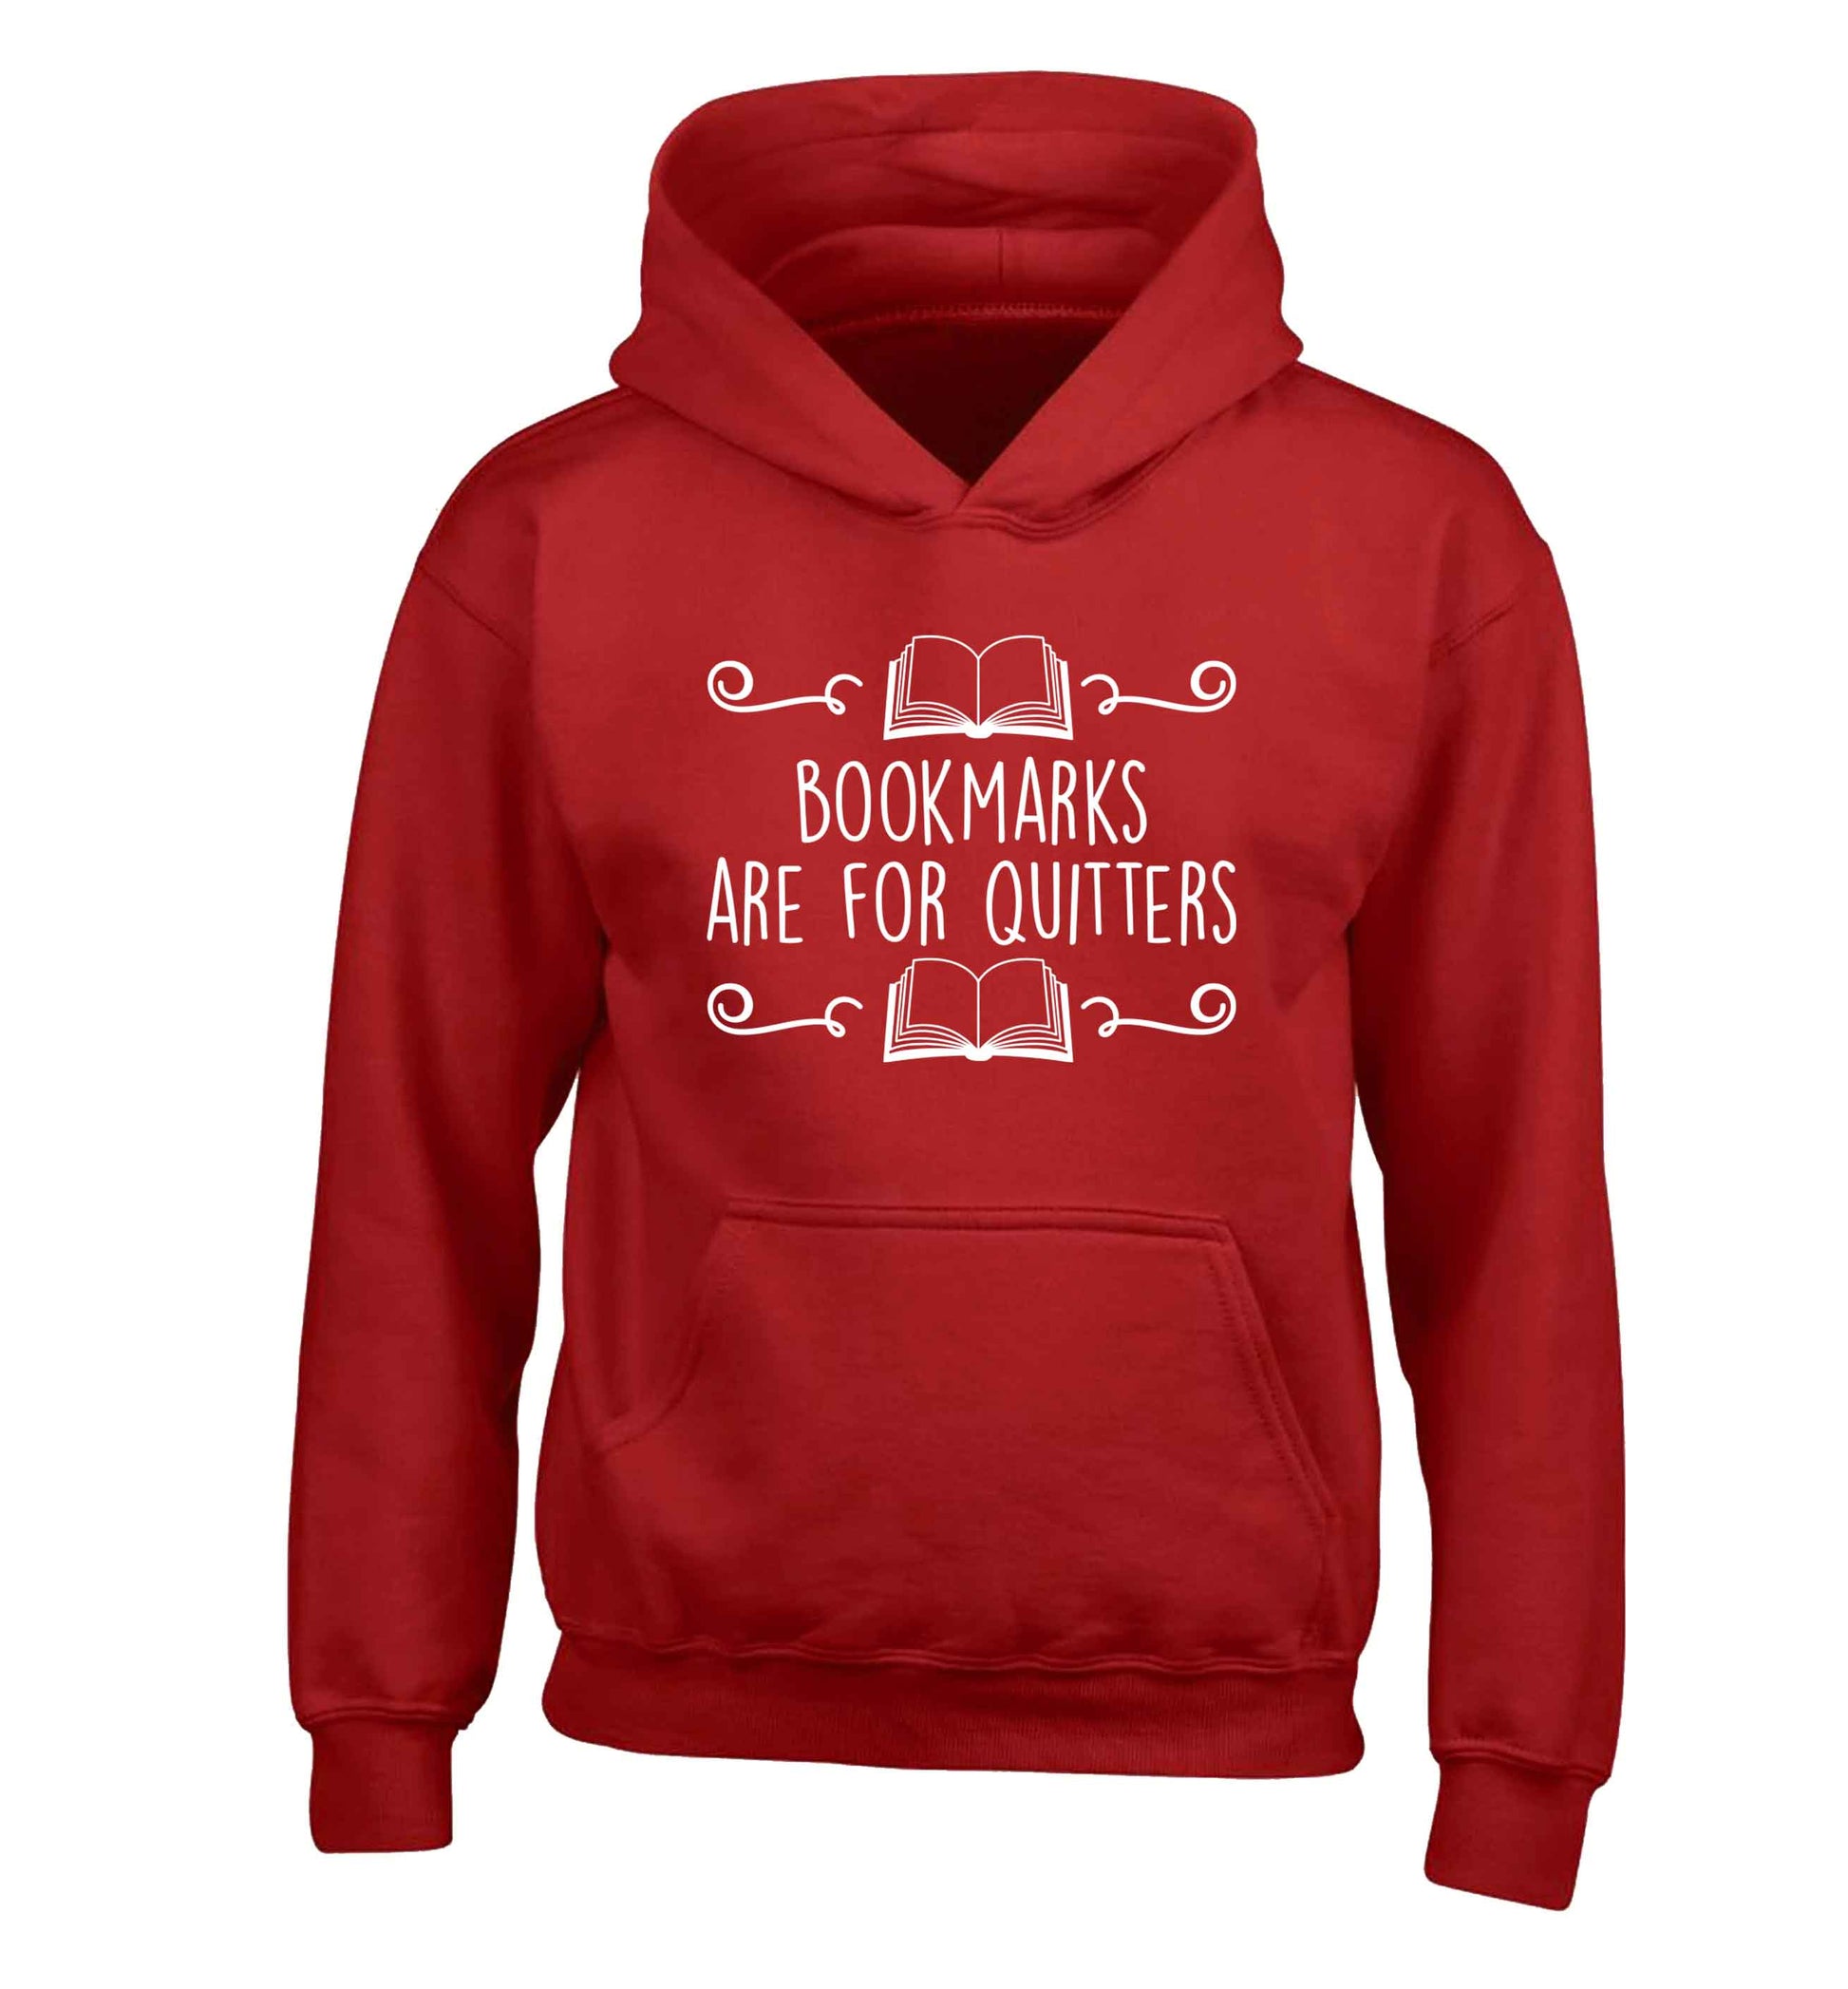 Bookmarks are for quitters children's red hoodie 12-13 Years